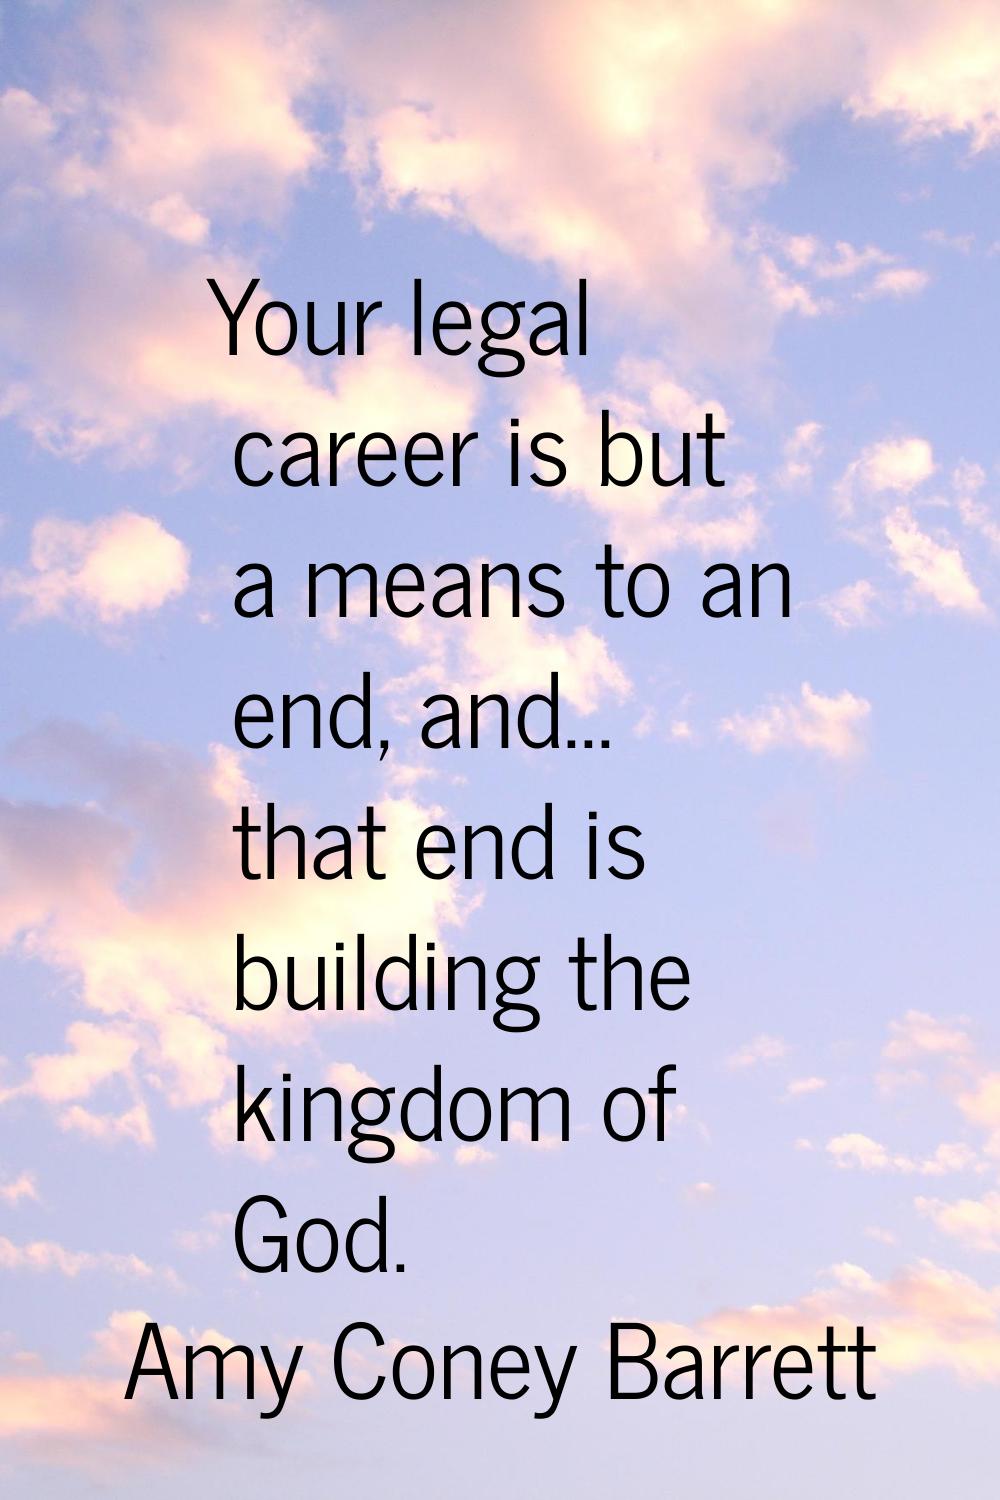 Your legal career is but a means to an end, and... that end is building the kingdom of God.